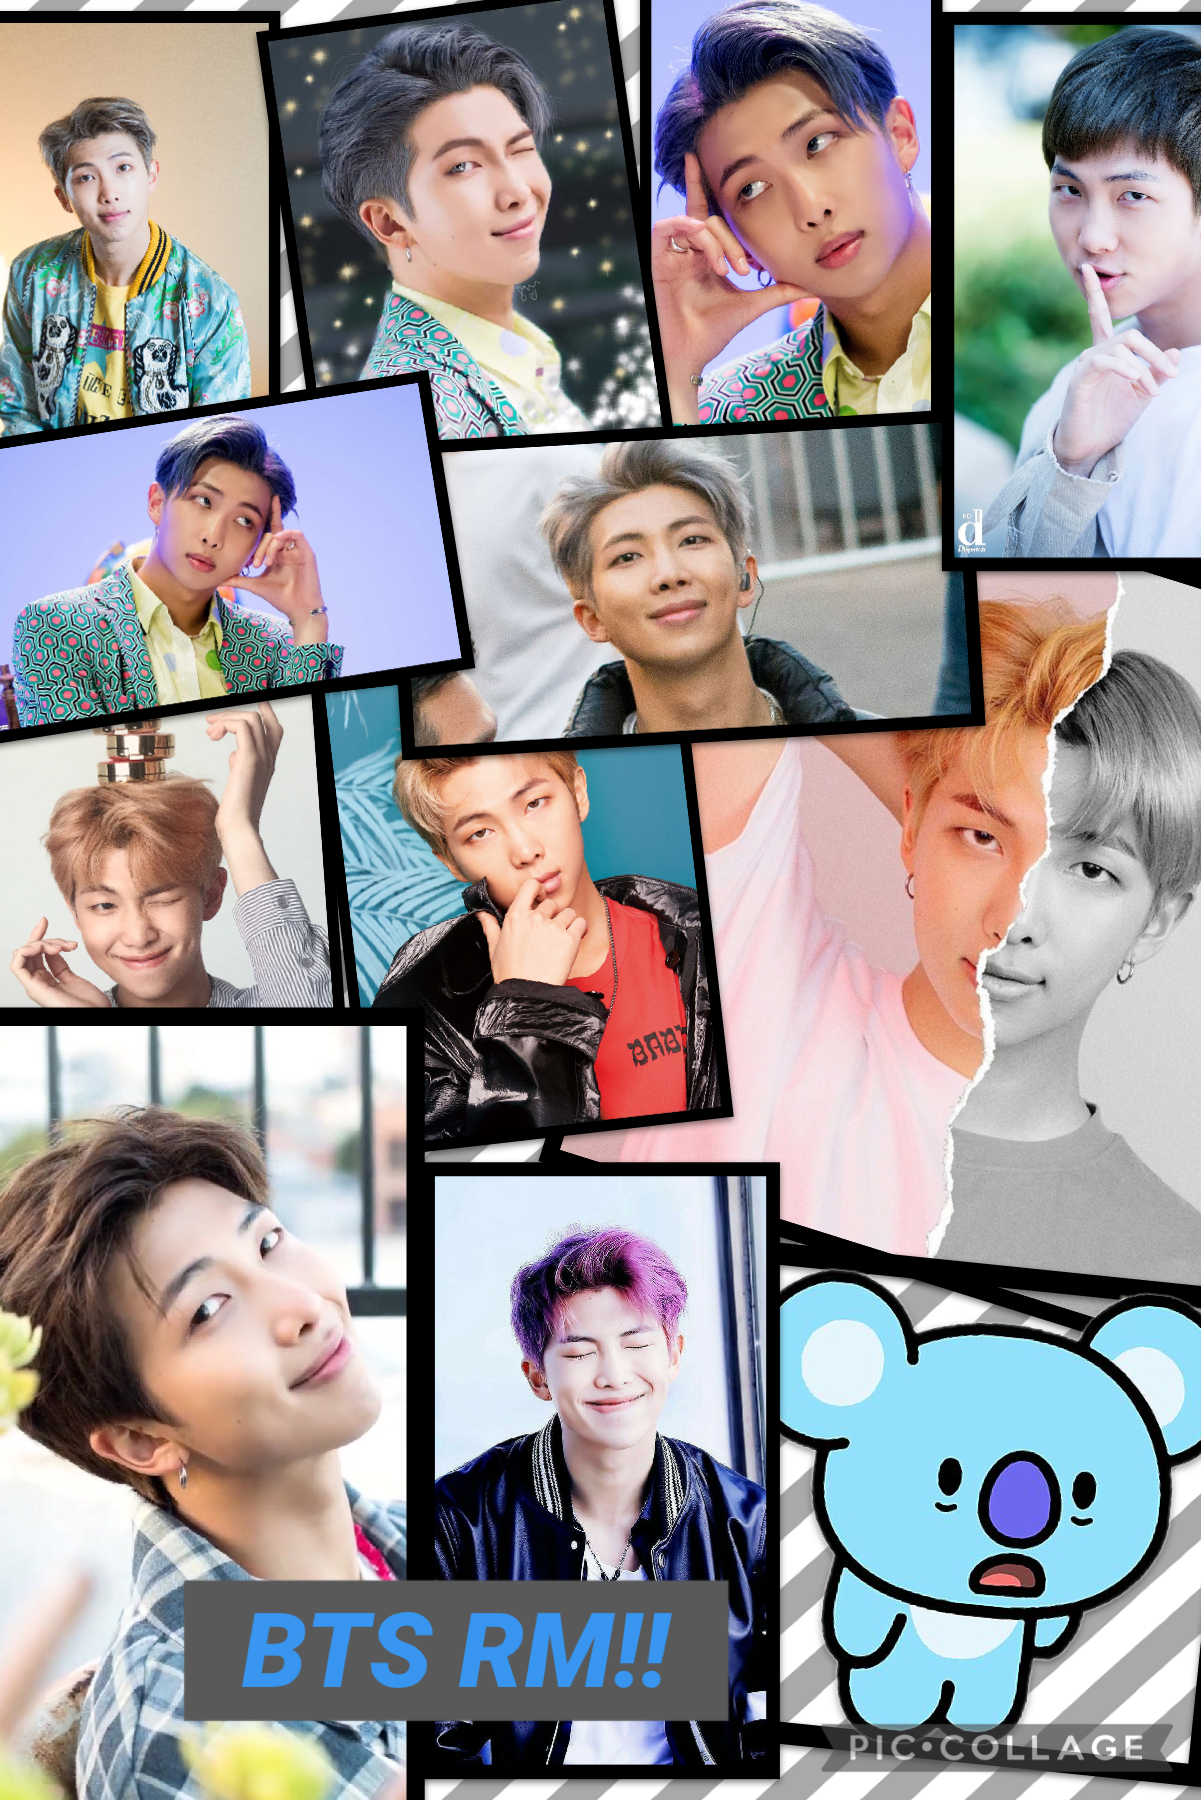 Kim Nam joon / Rm! Leader and spokes person for the south  Korean Boy band BTS aka Bangtan boys! 

The little blue guy in the corner is his BT21 Character his name is Ko ya! 💘💜💜💜💜 he represents Rm! 


Plea look up all of the bT21 characters and leaving to